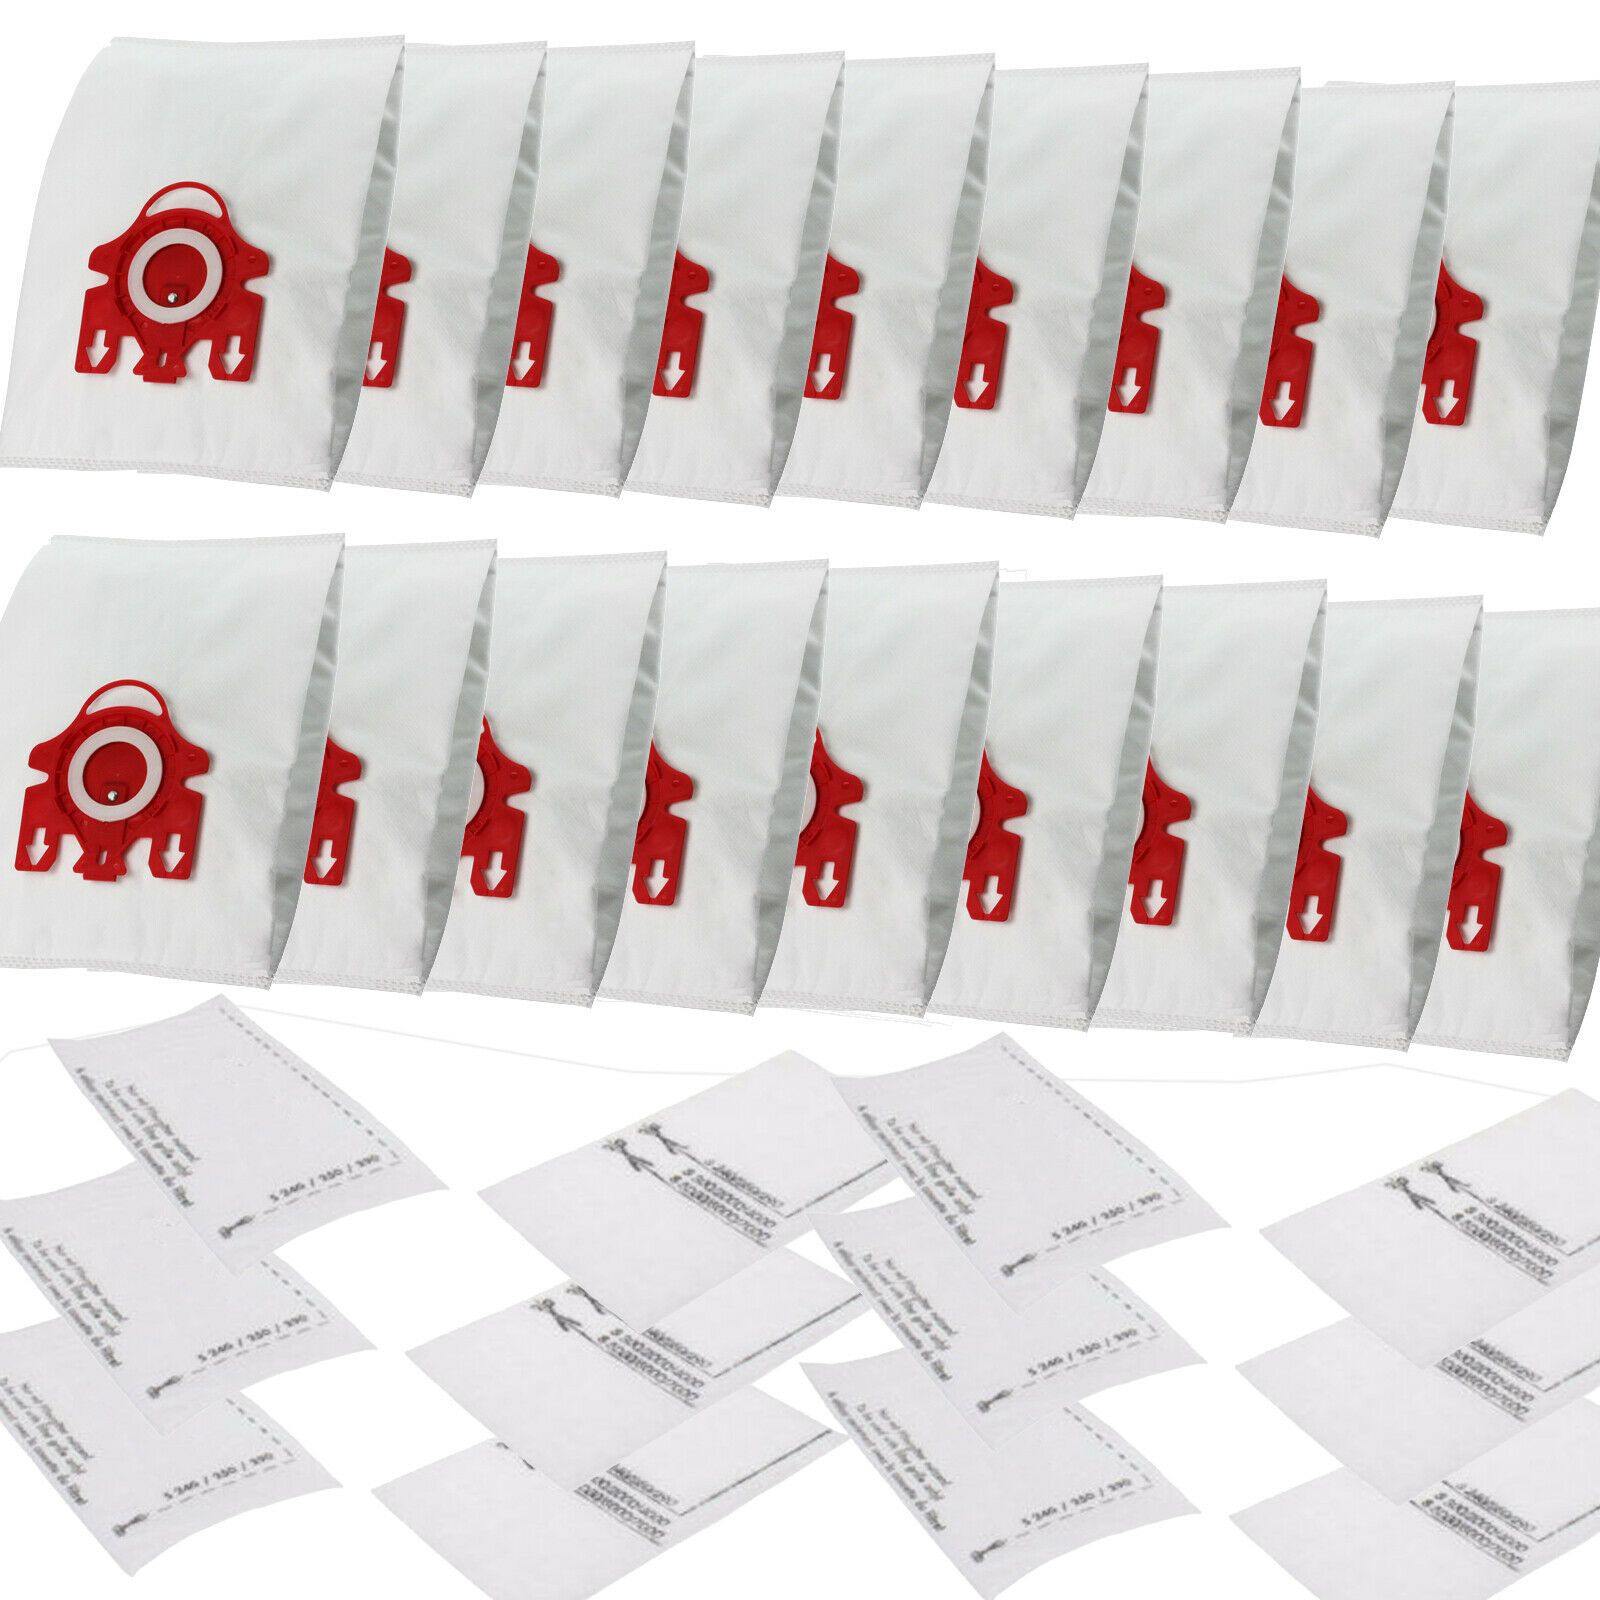 18 Vacuum Dust Bags & 12 Filters For Miele Compact C1 C2 S4 S6 S291 S381 S571 Sparesbarn